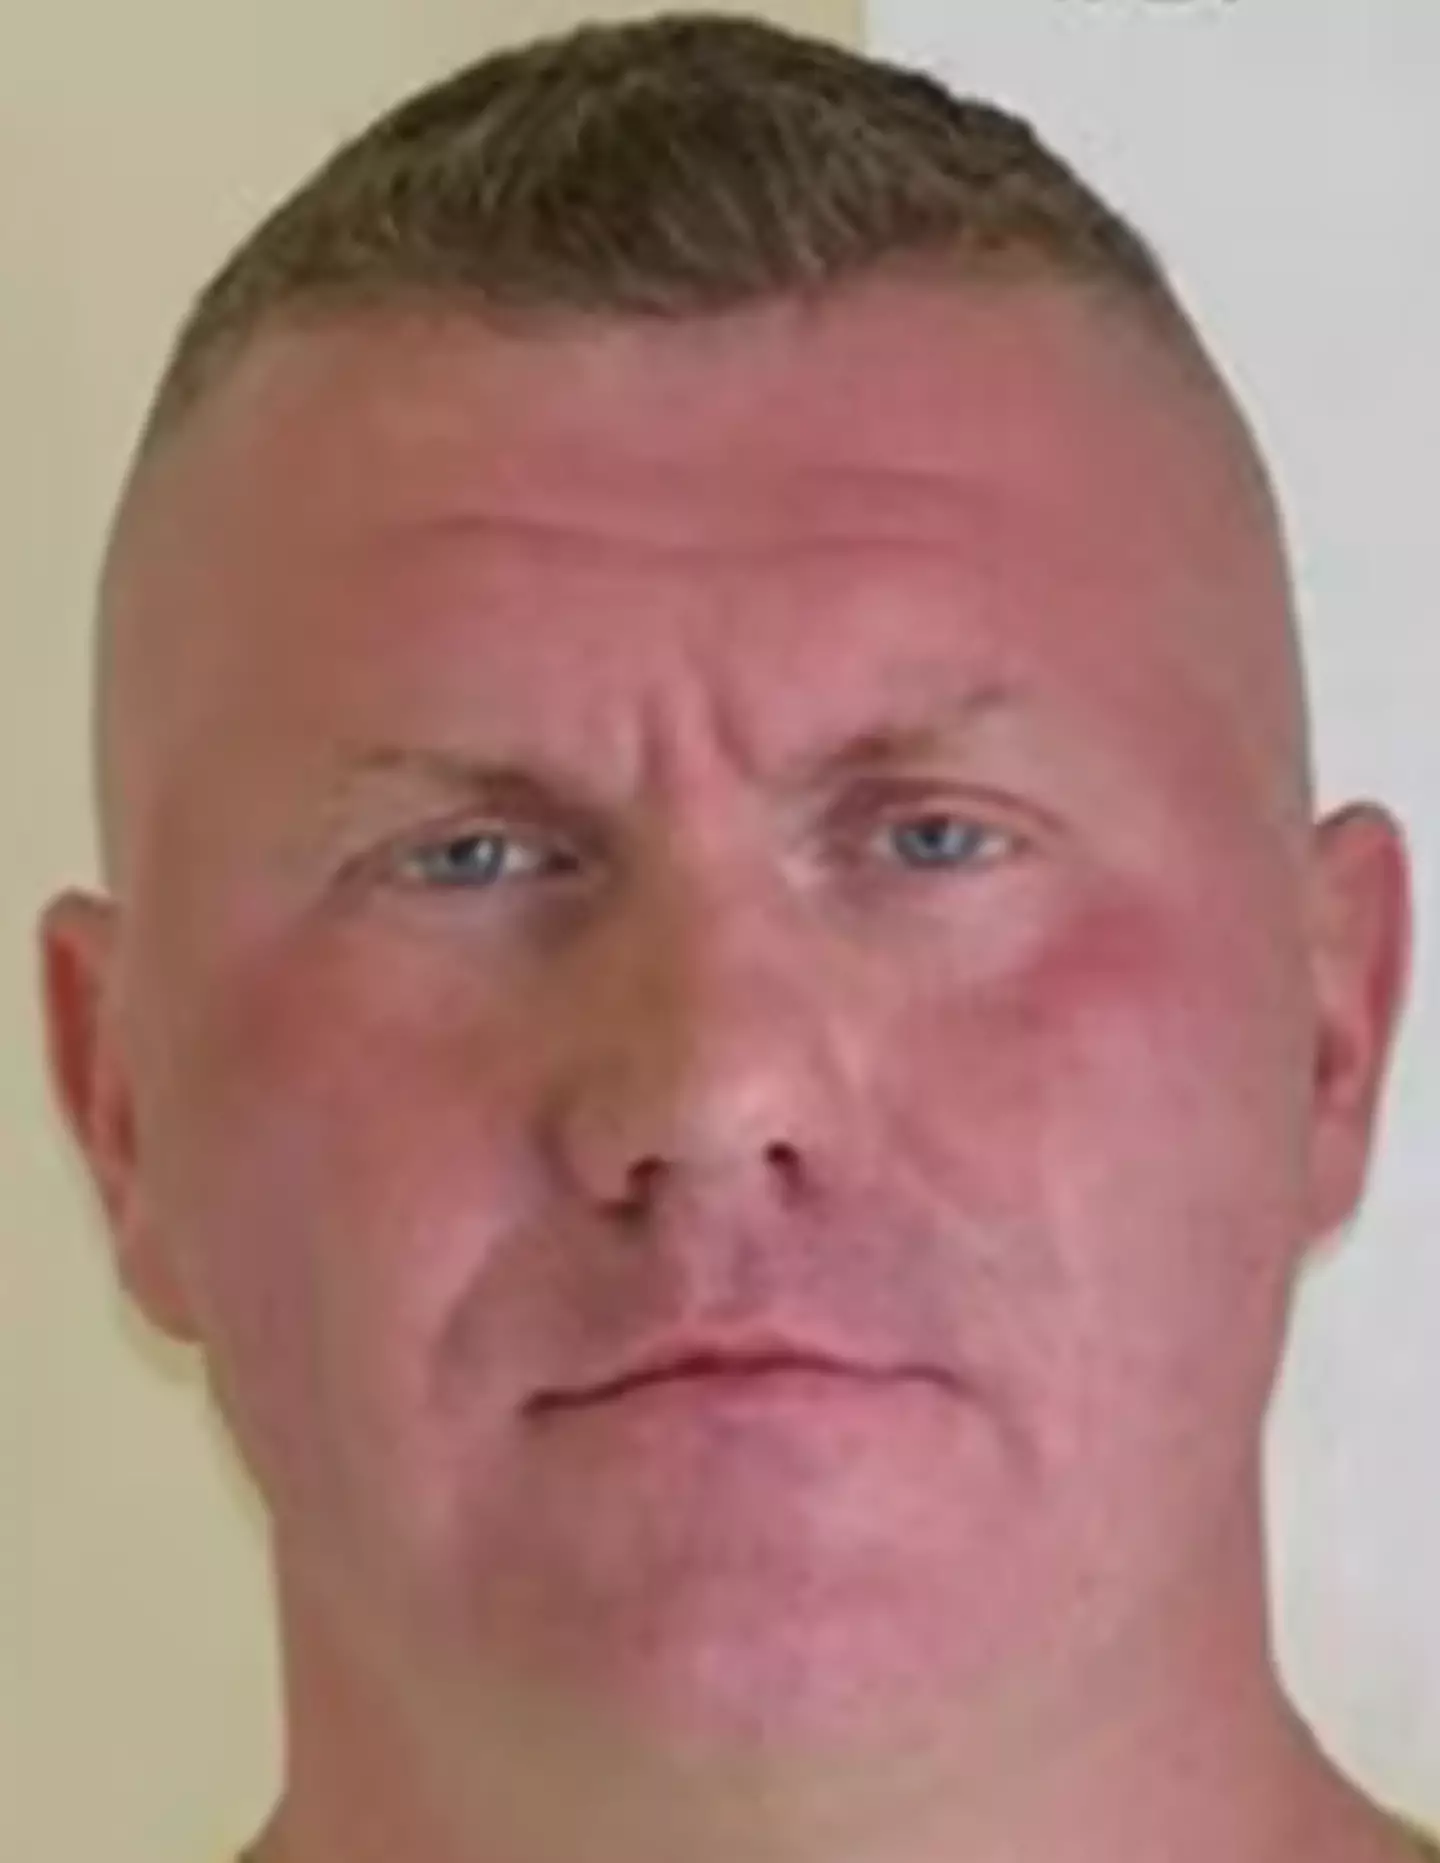 Raoul Moat went on the murdering rampage in 2010.